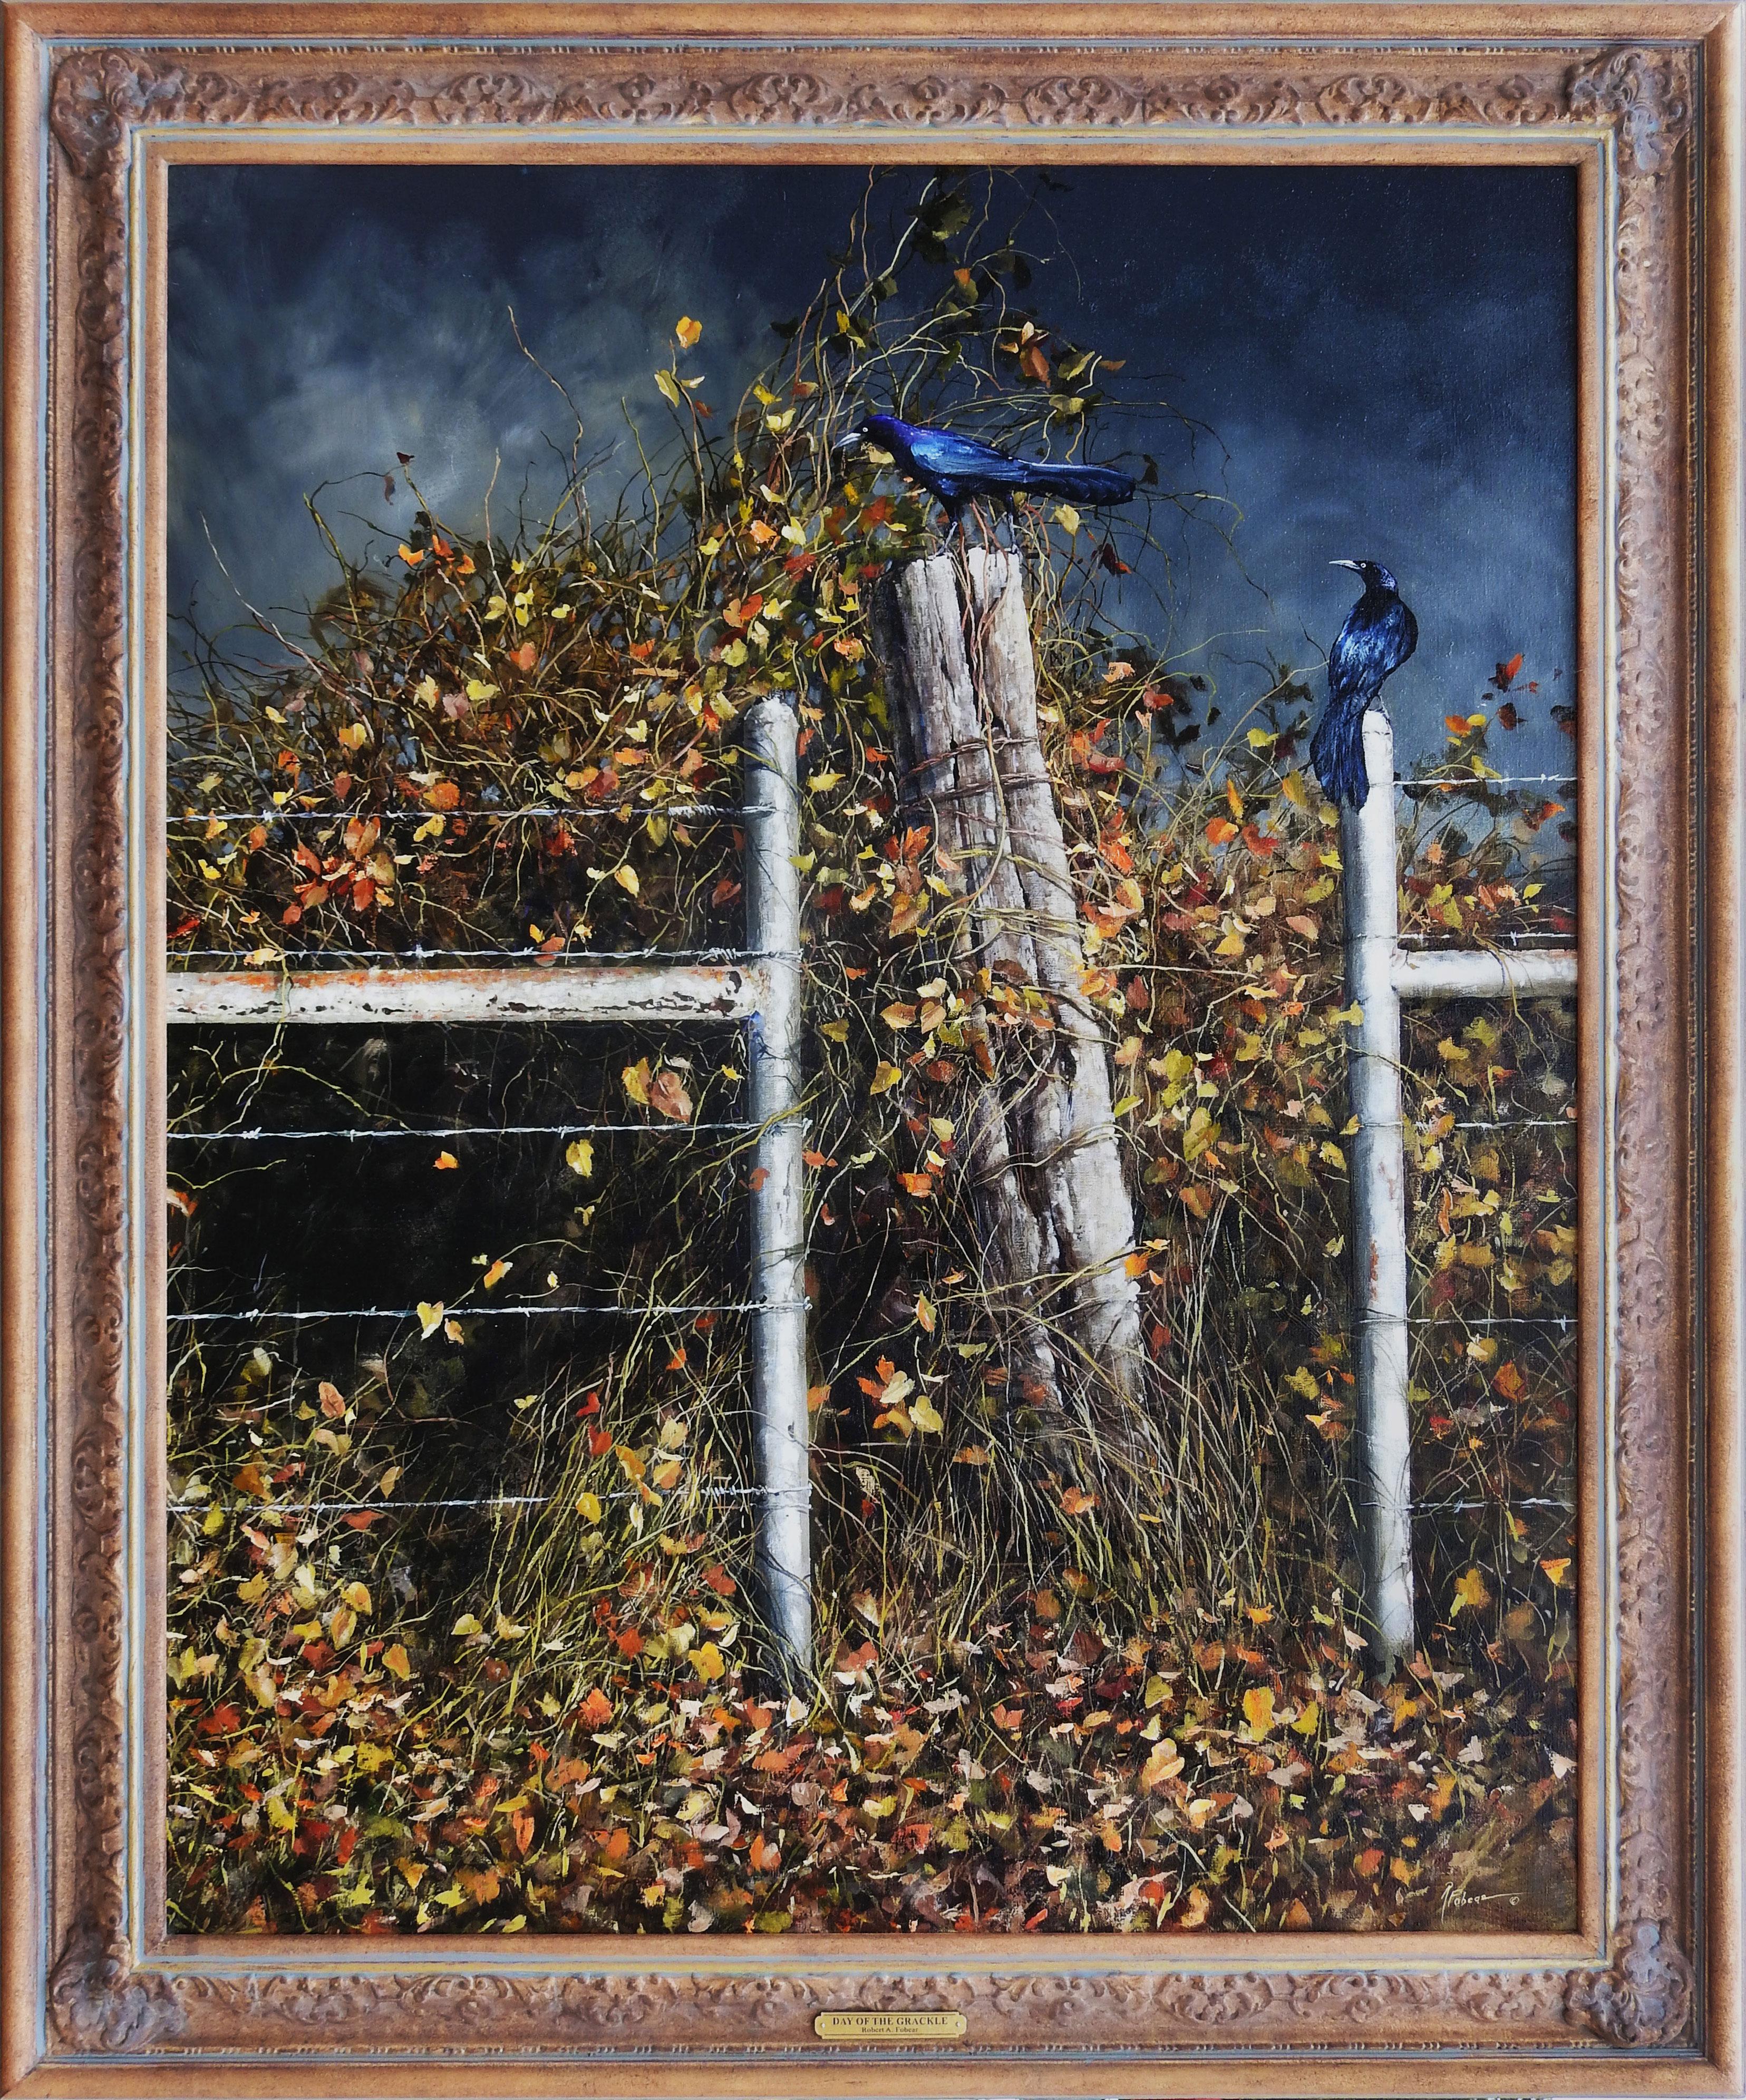 "Calling for Rain" is an original oil on linen painting by Texas Artist Robert Fobear and measures 60x48 inches. This stunning piece captures the essence of autumn with its vibrant gold and green leaves, set against a dark and moody sky. The focal